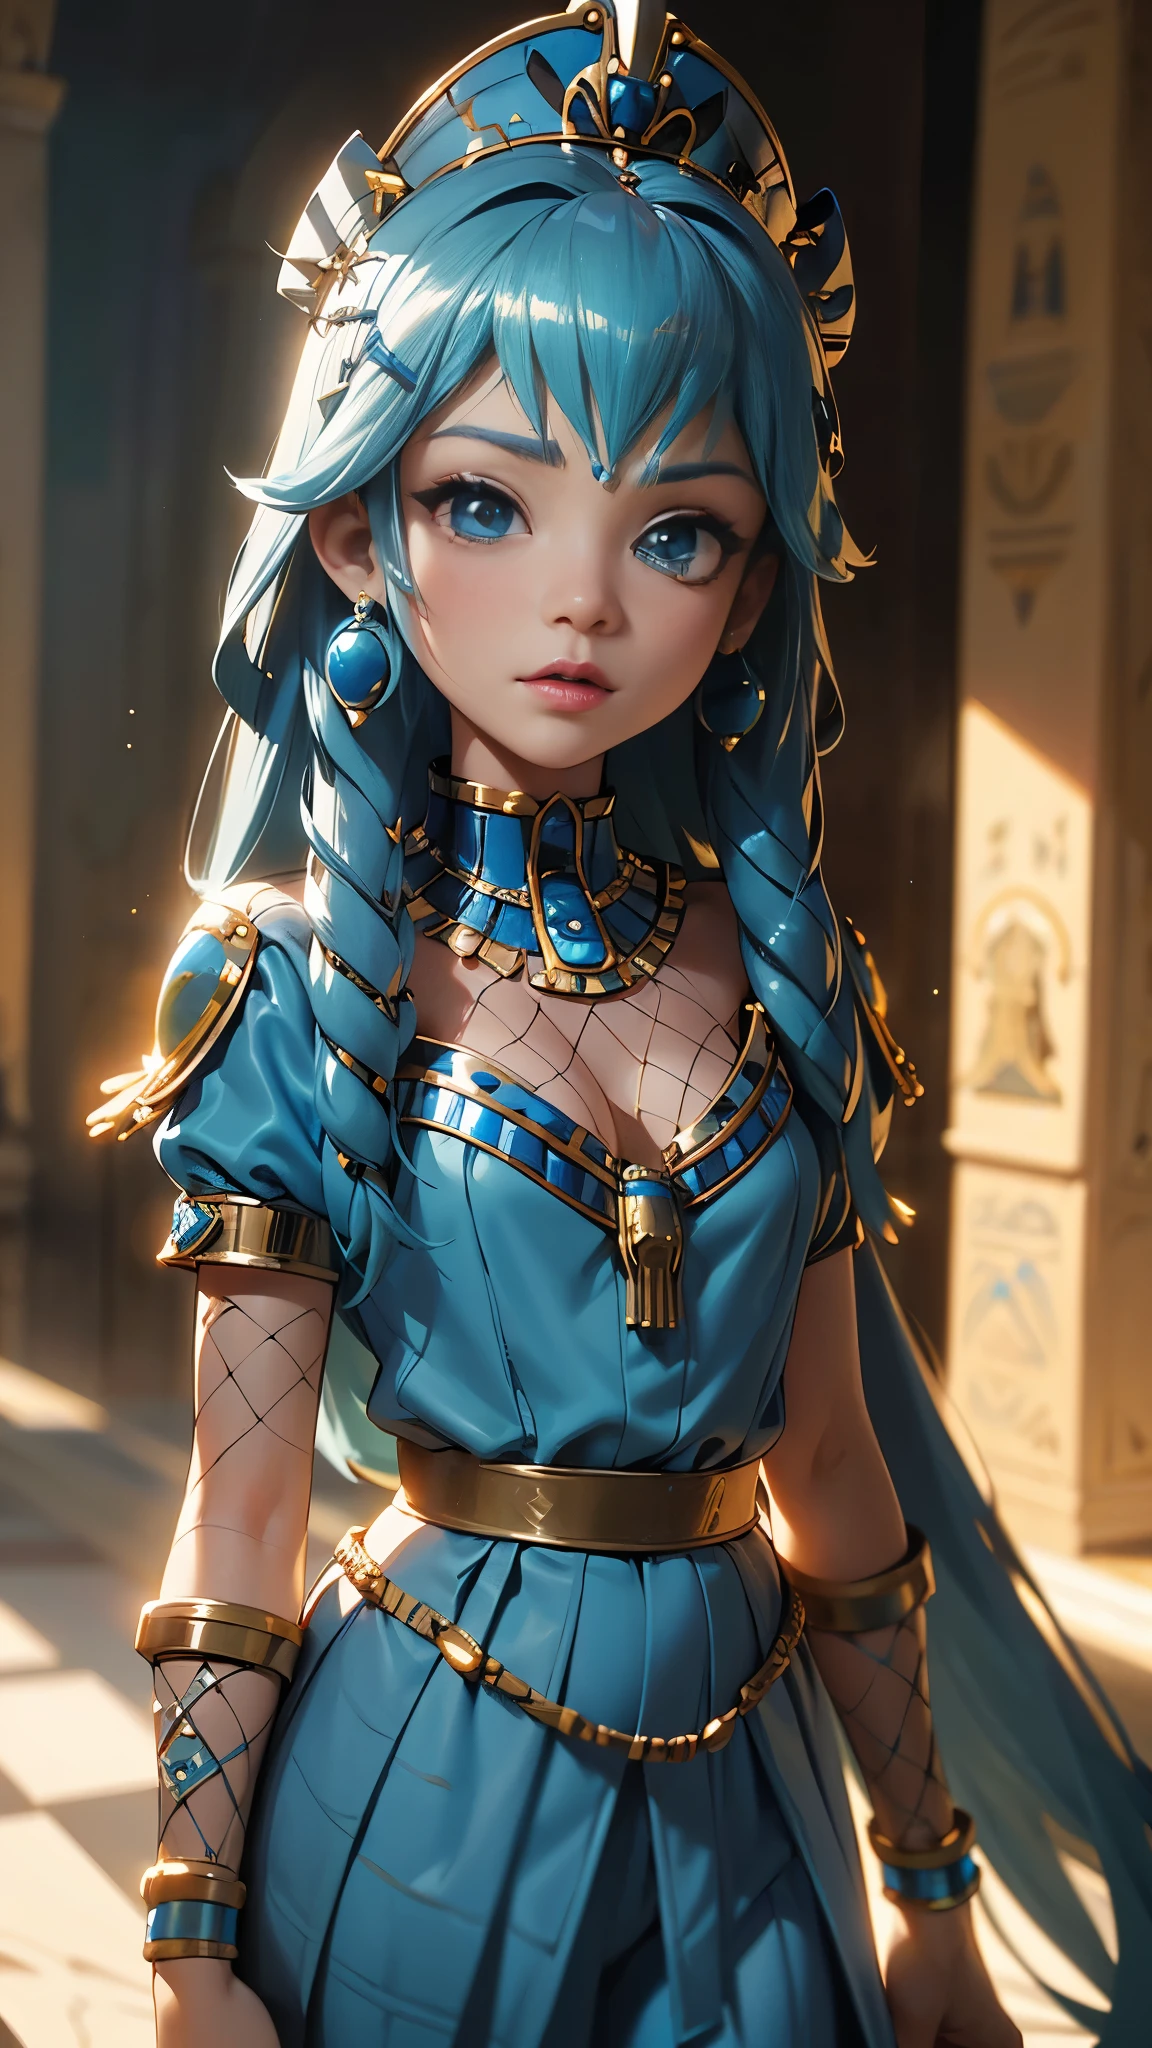 (La Best Quality,A high resolution,Ultra - detailed,actual),Ariana Grande in Cleopatra Pharaoh costume ,princess egypt, (Egypt palace background),More detailed 8K.unreal engine:1.4,UHD,La Best Quality:1.4, photorealistic:1.4, skin texture:1.4, masterpiece:1.8,first work, Best Quality,object object], (detailed face features:1.3),(The correct proportions),convex，(camel toes)，(fishnet:1.4),(Beautiful blue eyes) ,(blue water background), (cleopatra pharaoh:1.4) 